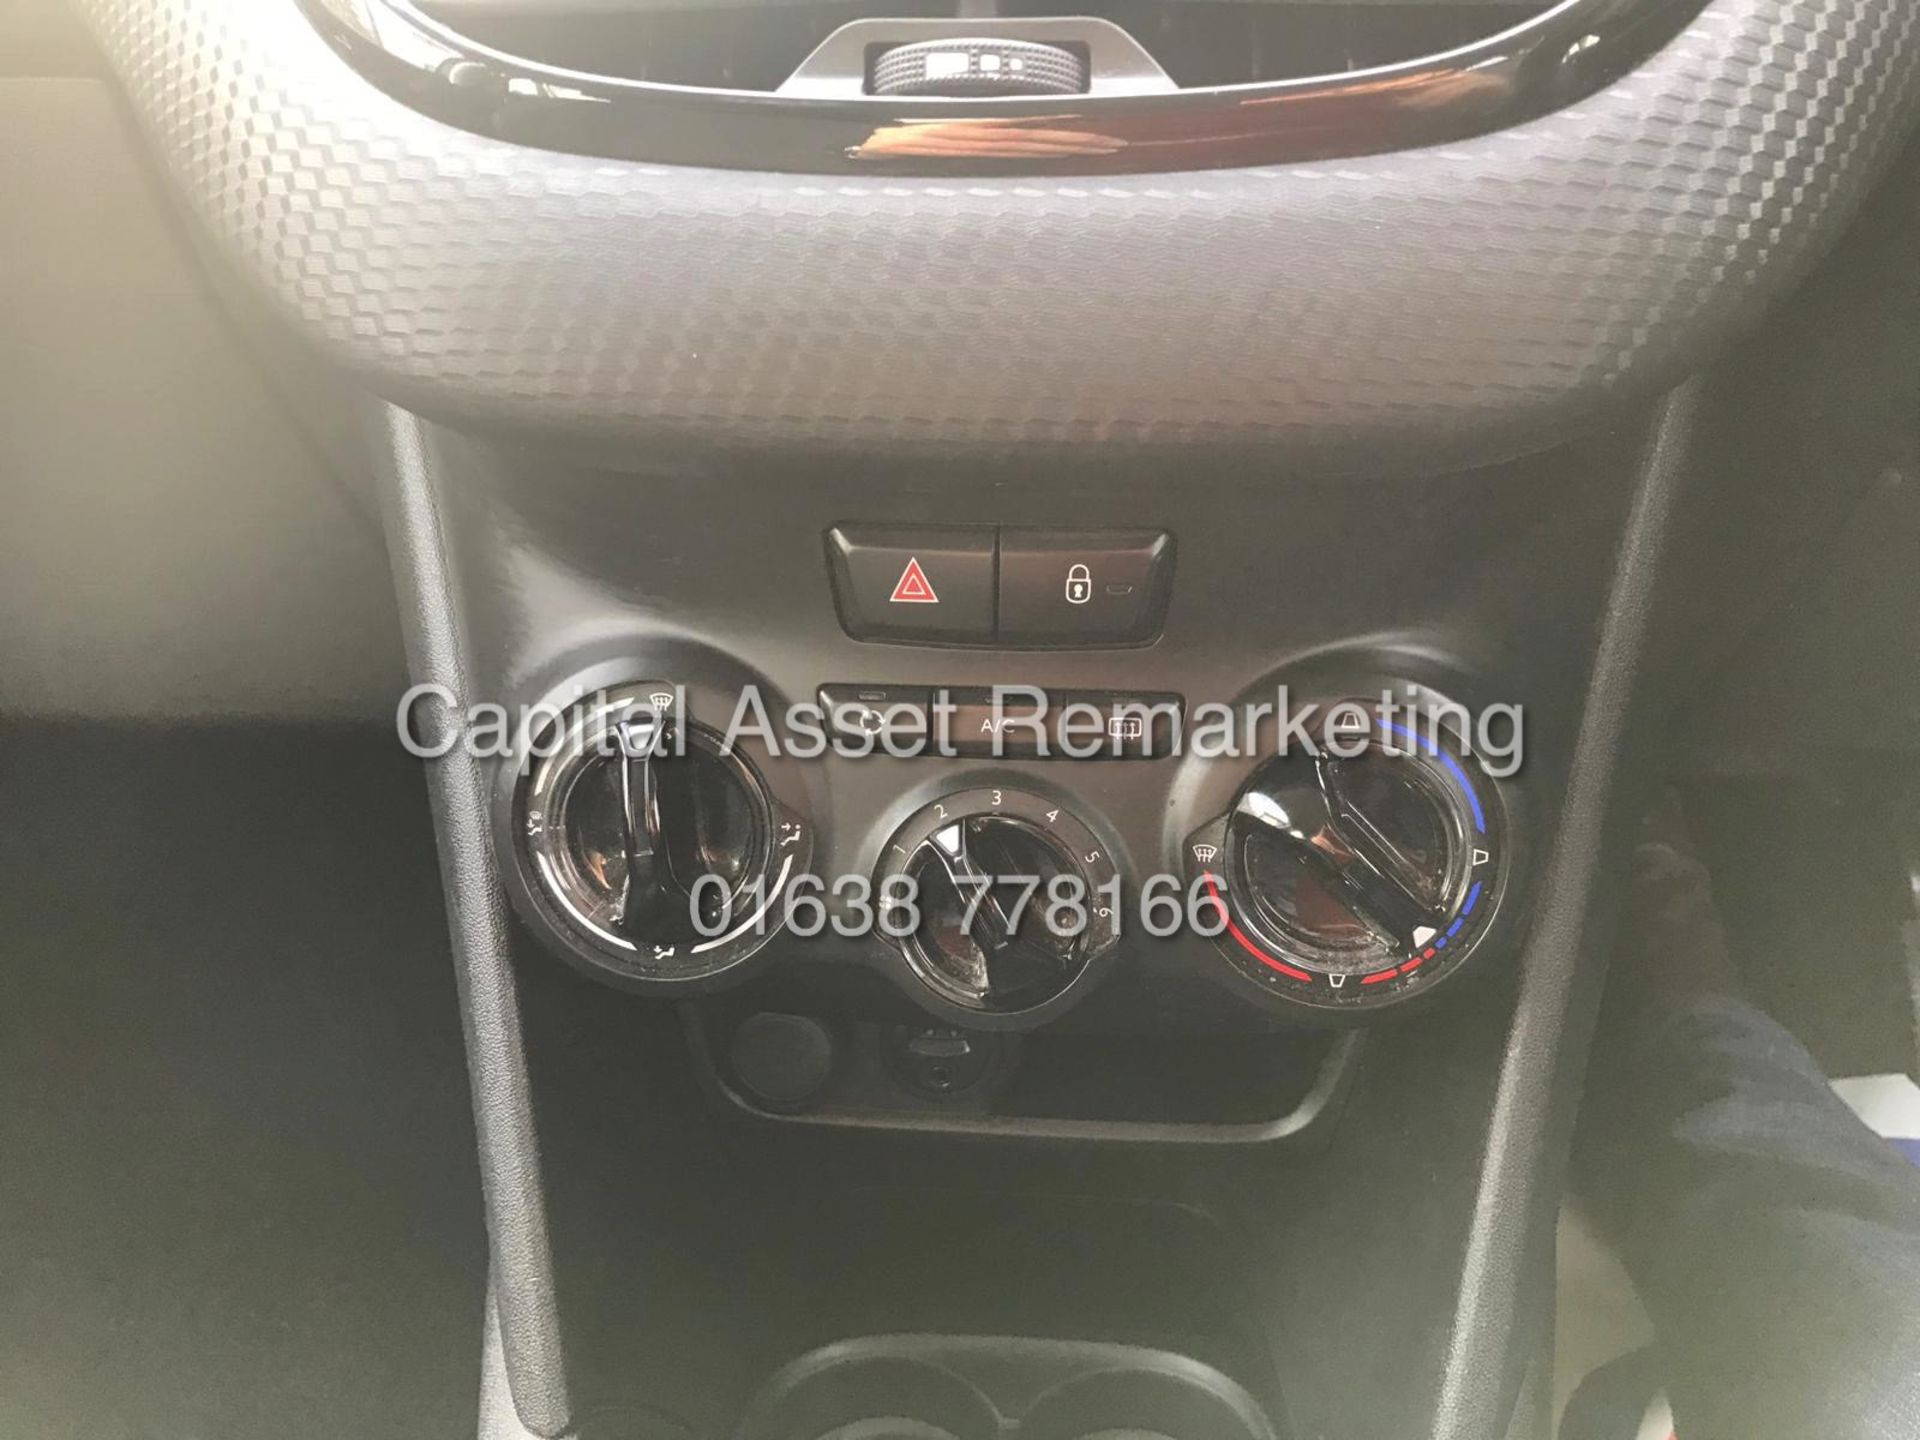 (ON SALE) PEUGEOT 208 "ACTIVE" PETROL MODEL - 2016 REG - 1 KEEPER - AIR CON - GREAT SPEC - LOOK!!! - Image 14 of 17